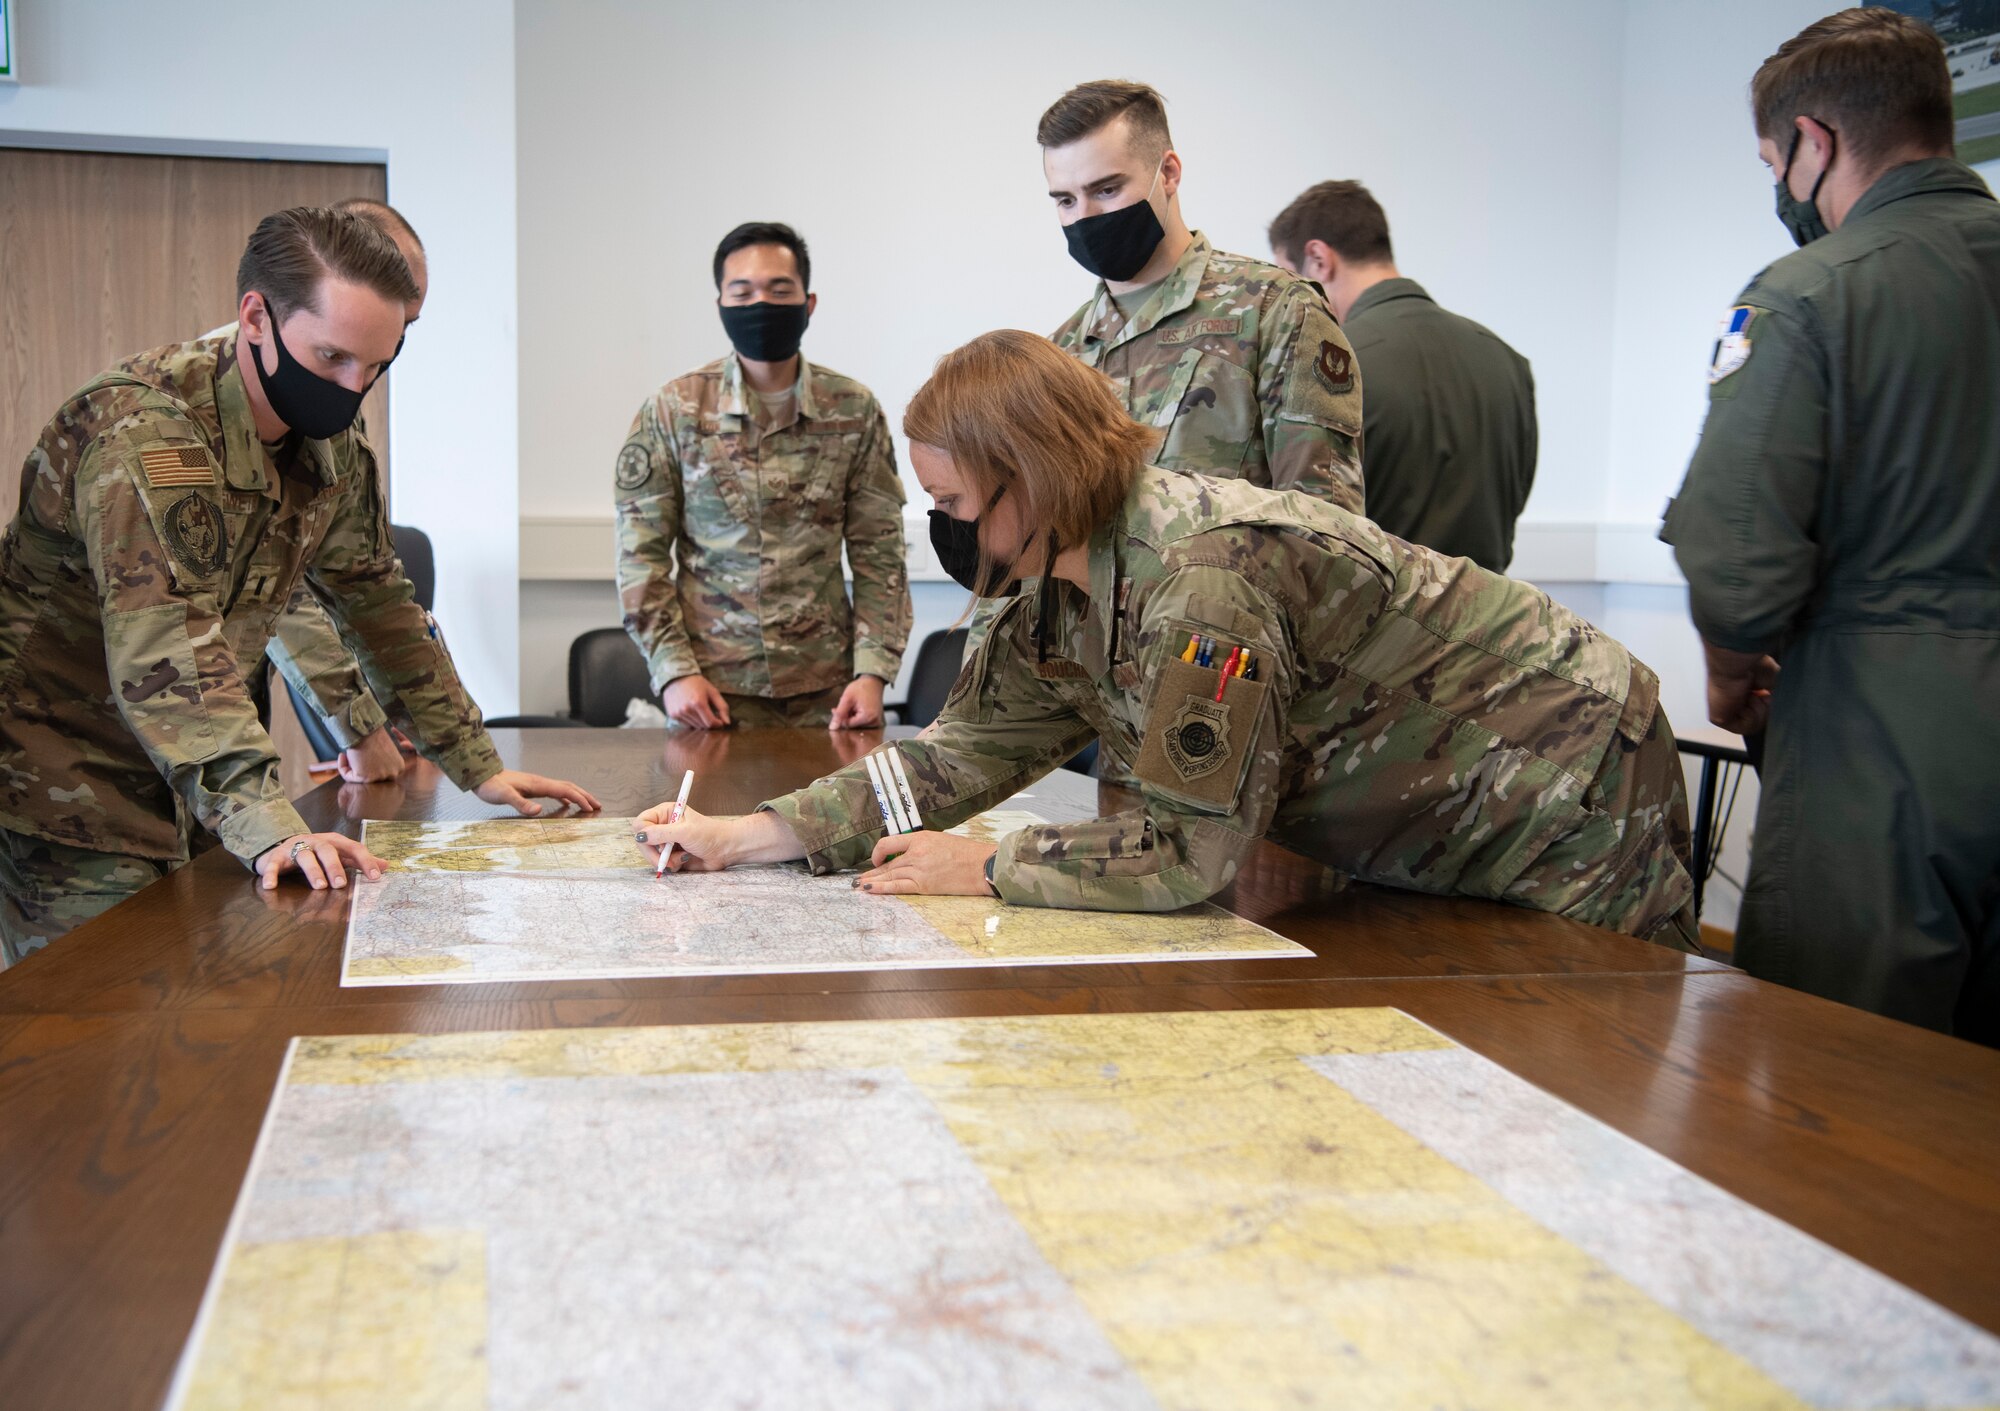 The verification process is a week long development course in which members demonstrate their ability to solve tactical problems concluding with a presentation to base leaders of their plans to solve a prearranged issue.